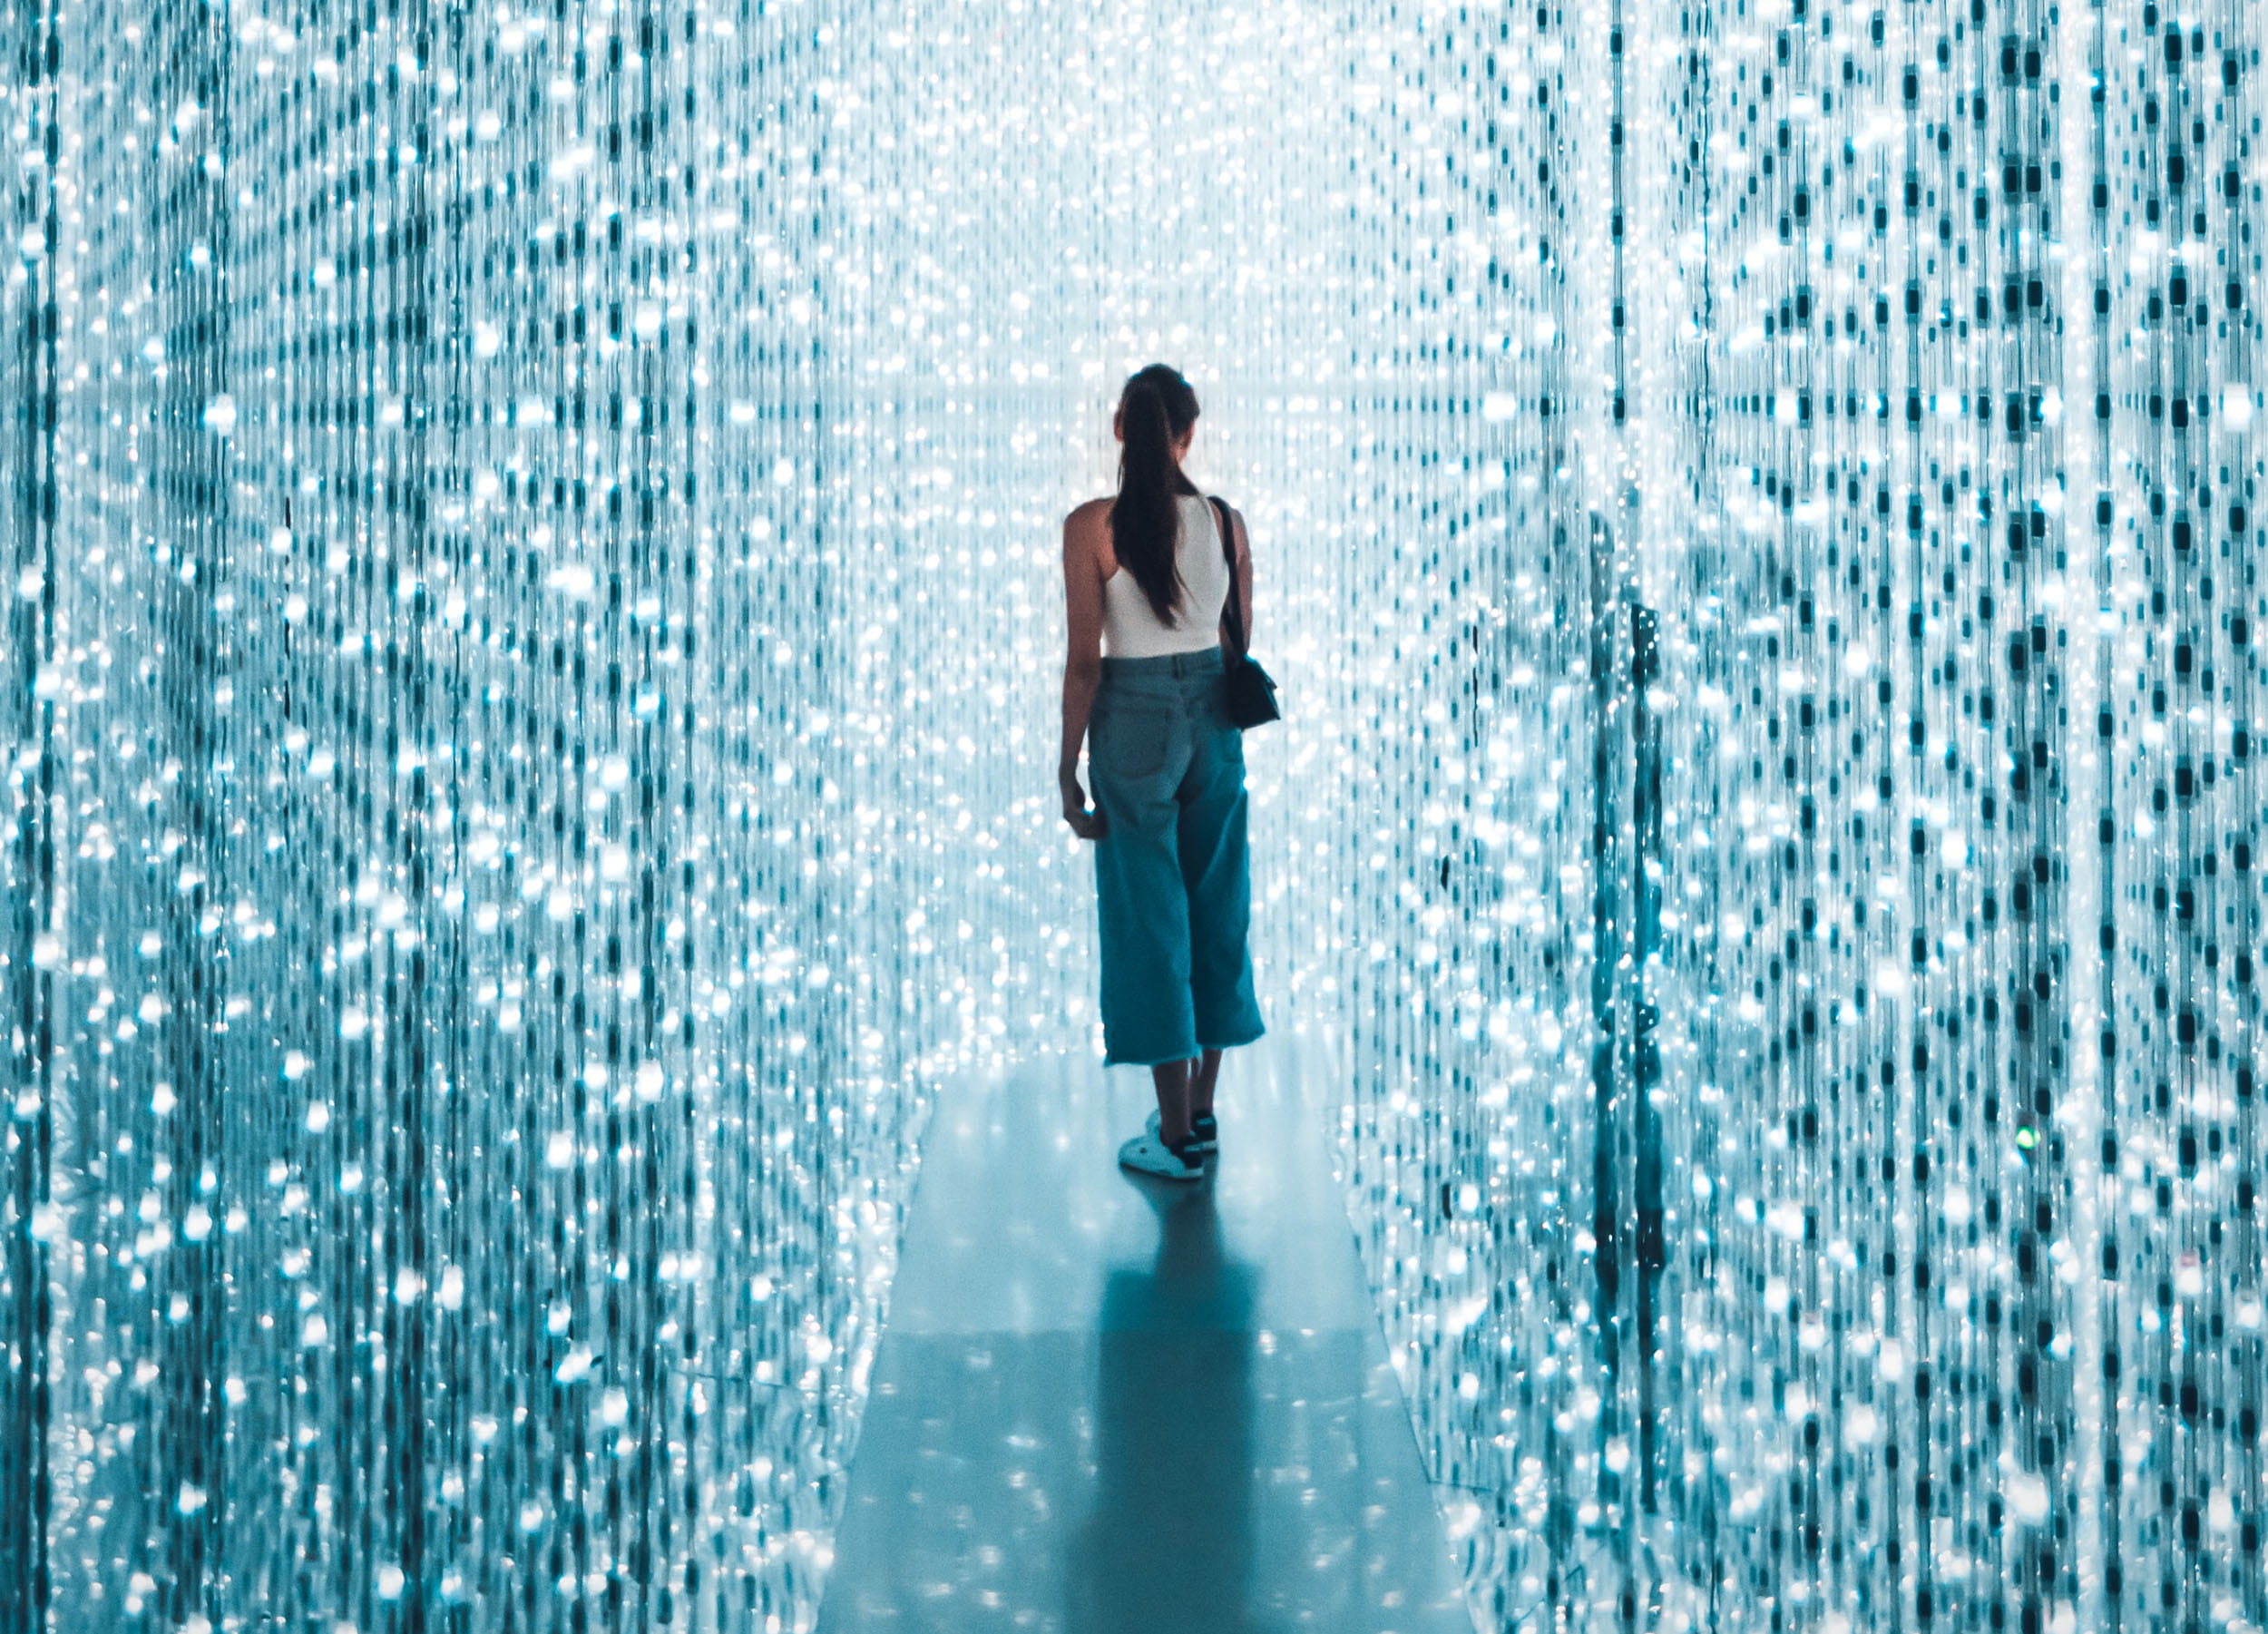 A woman standing on a small platform, surrounded by strings of blue and white lights running floor to ceiling.